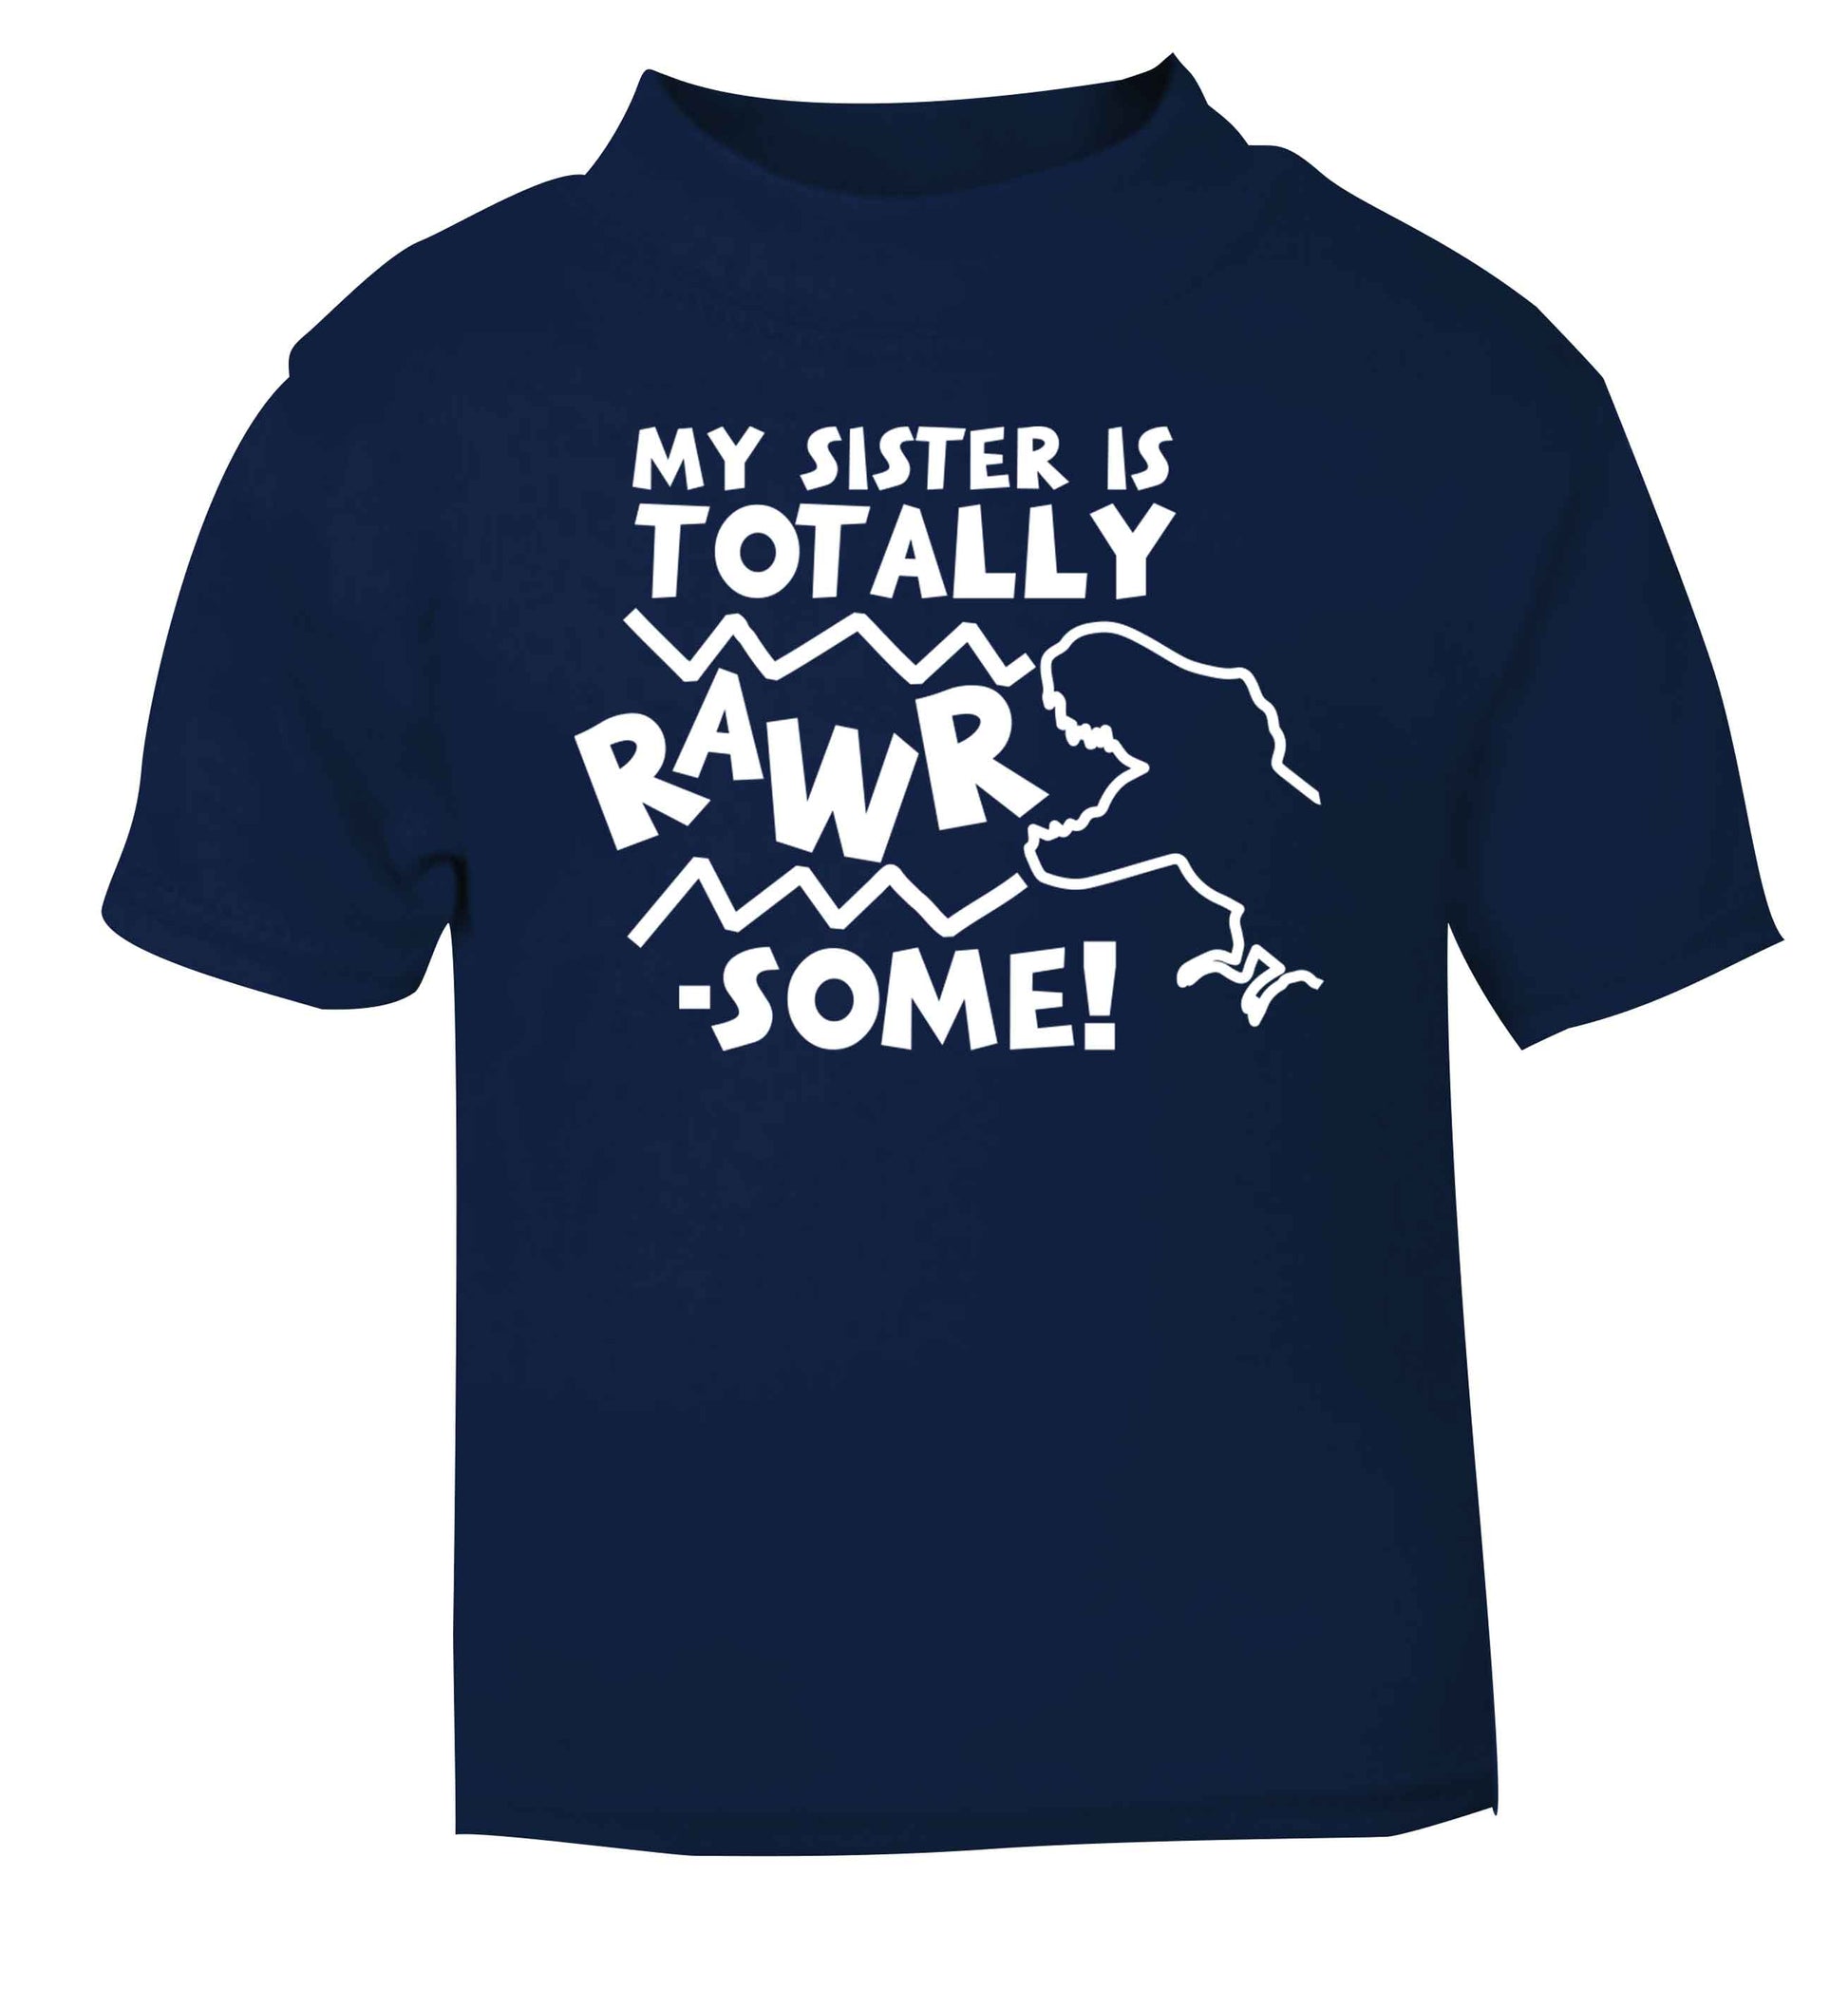 My sister is totally rawrsome navy baby toddler Tshirt 2 Years